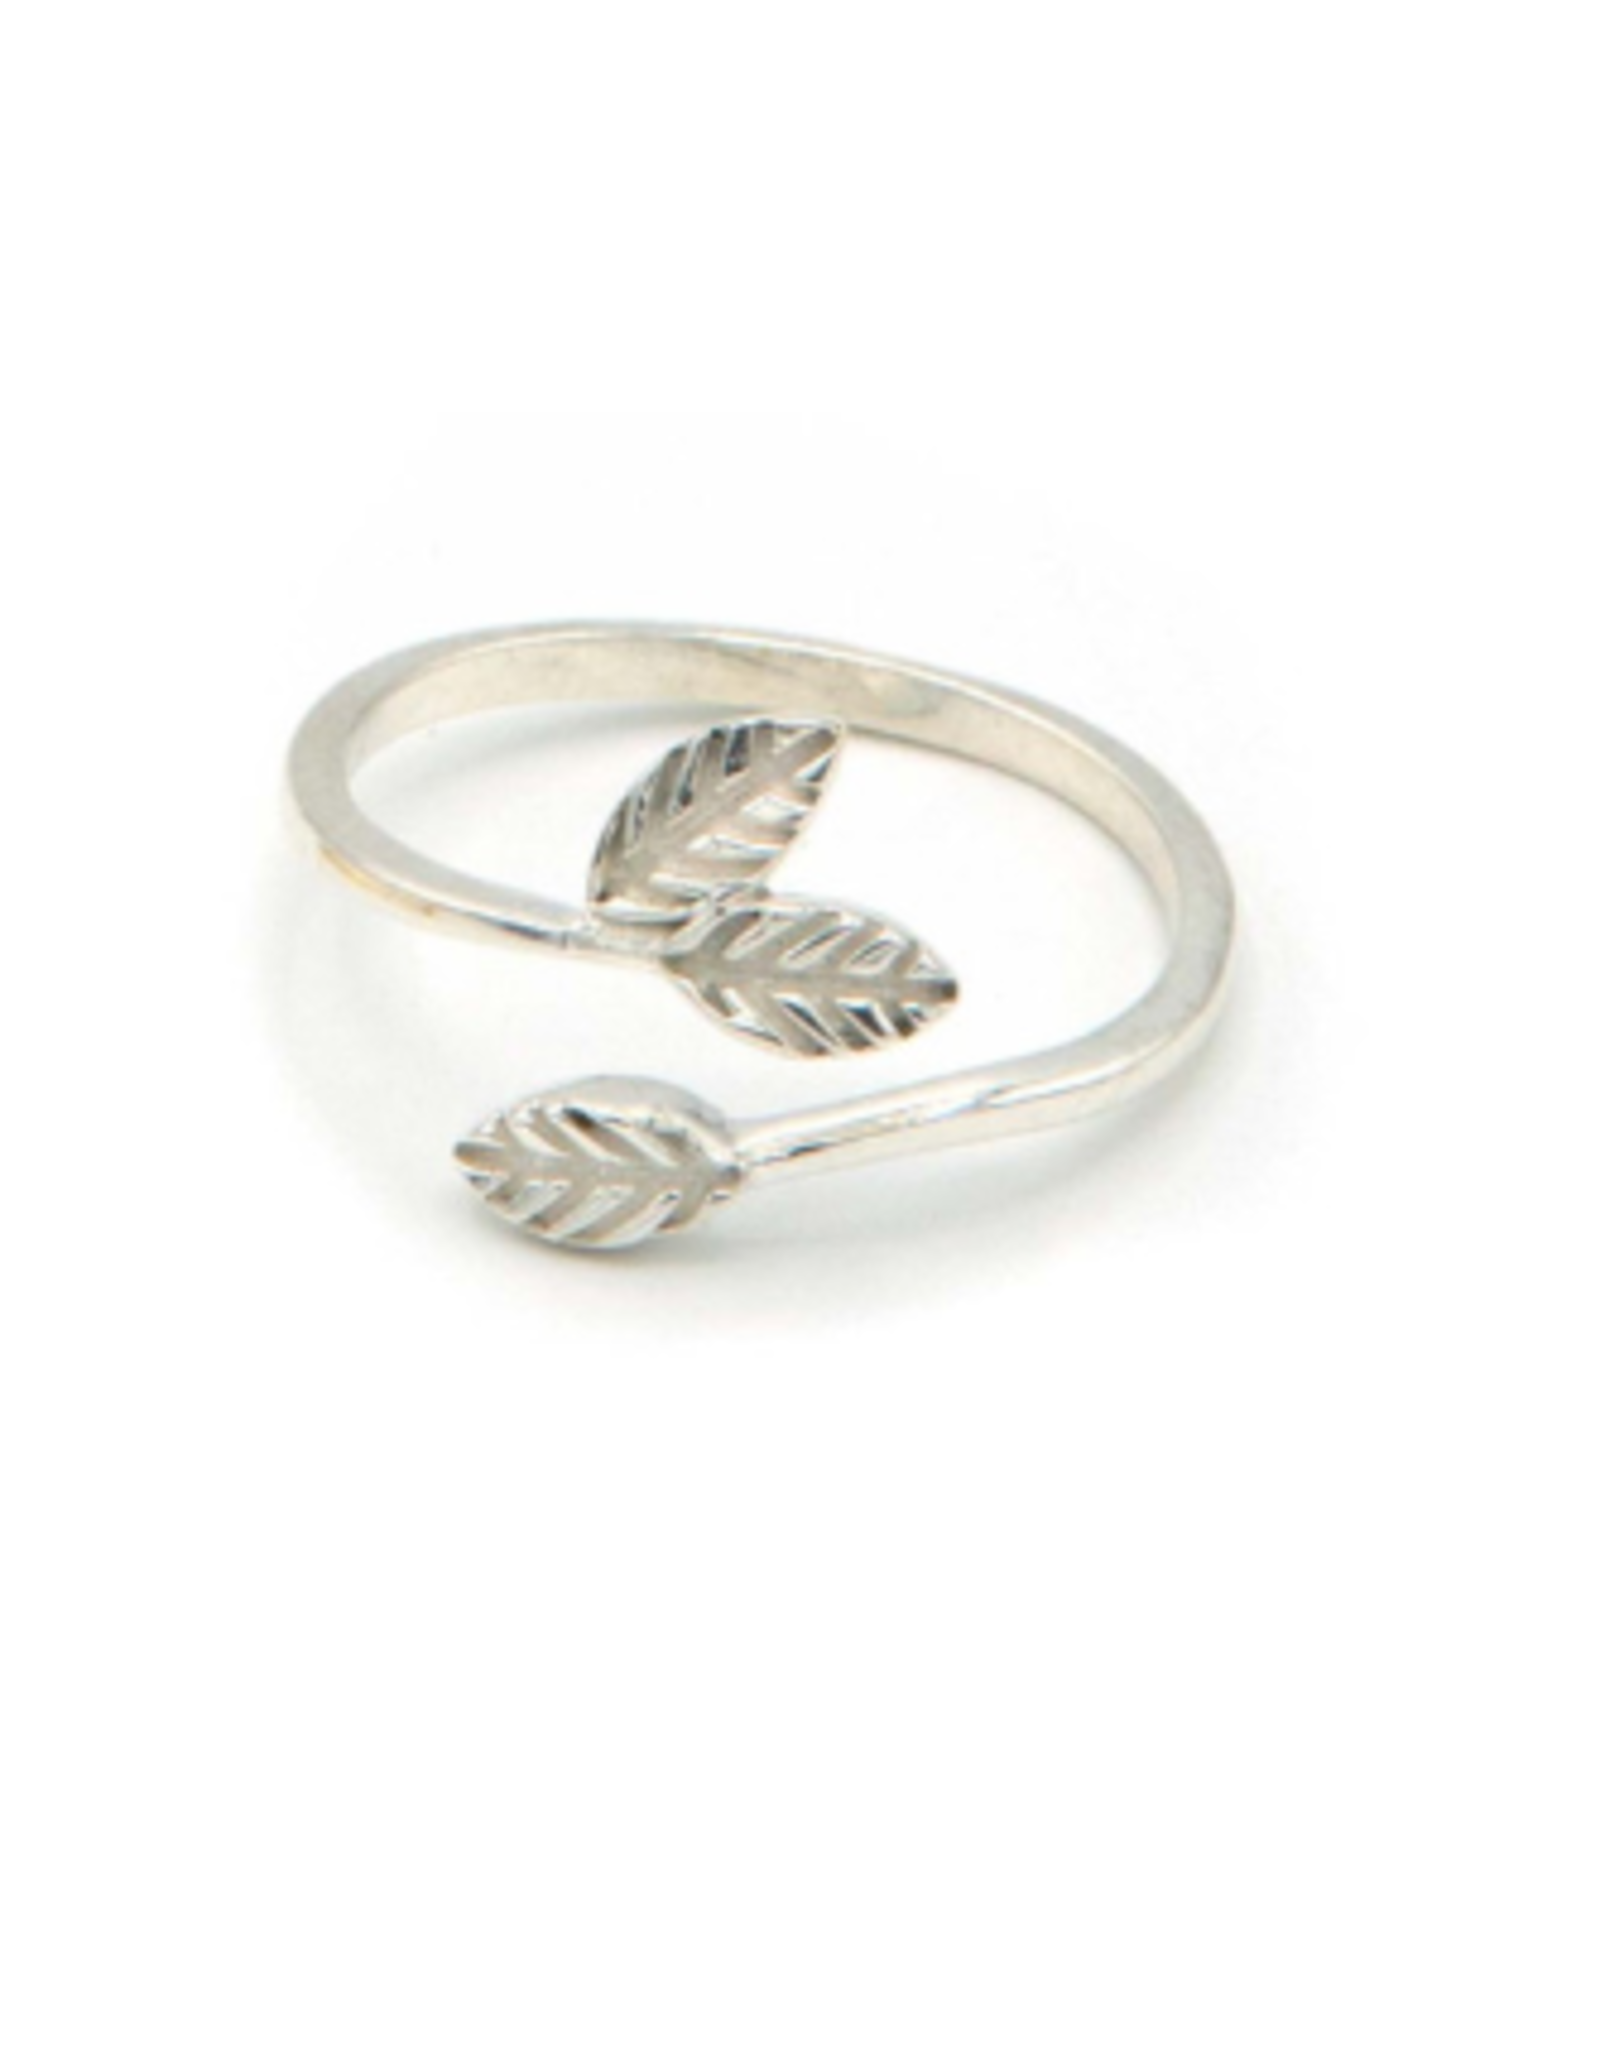 India Forestry Ring, Silver, India